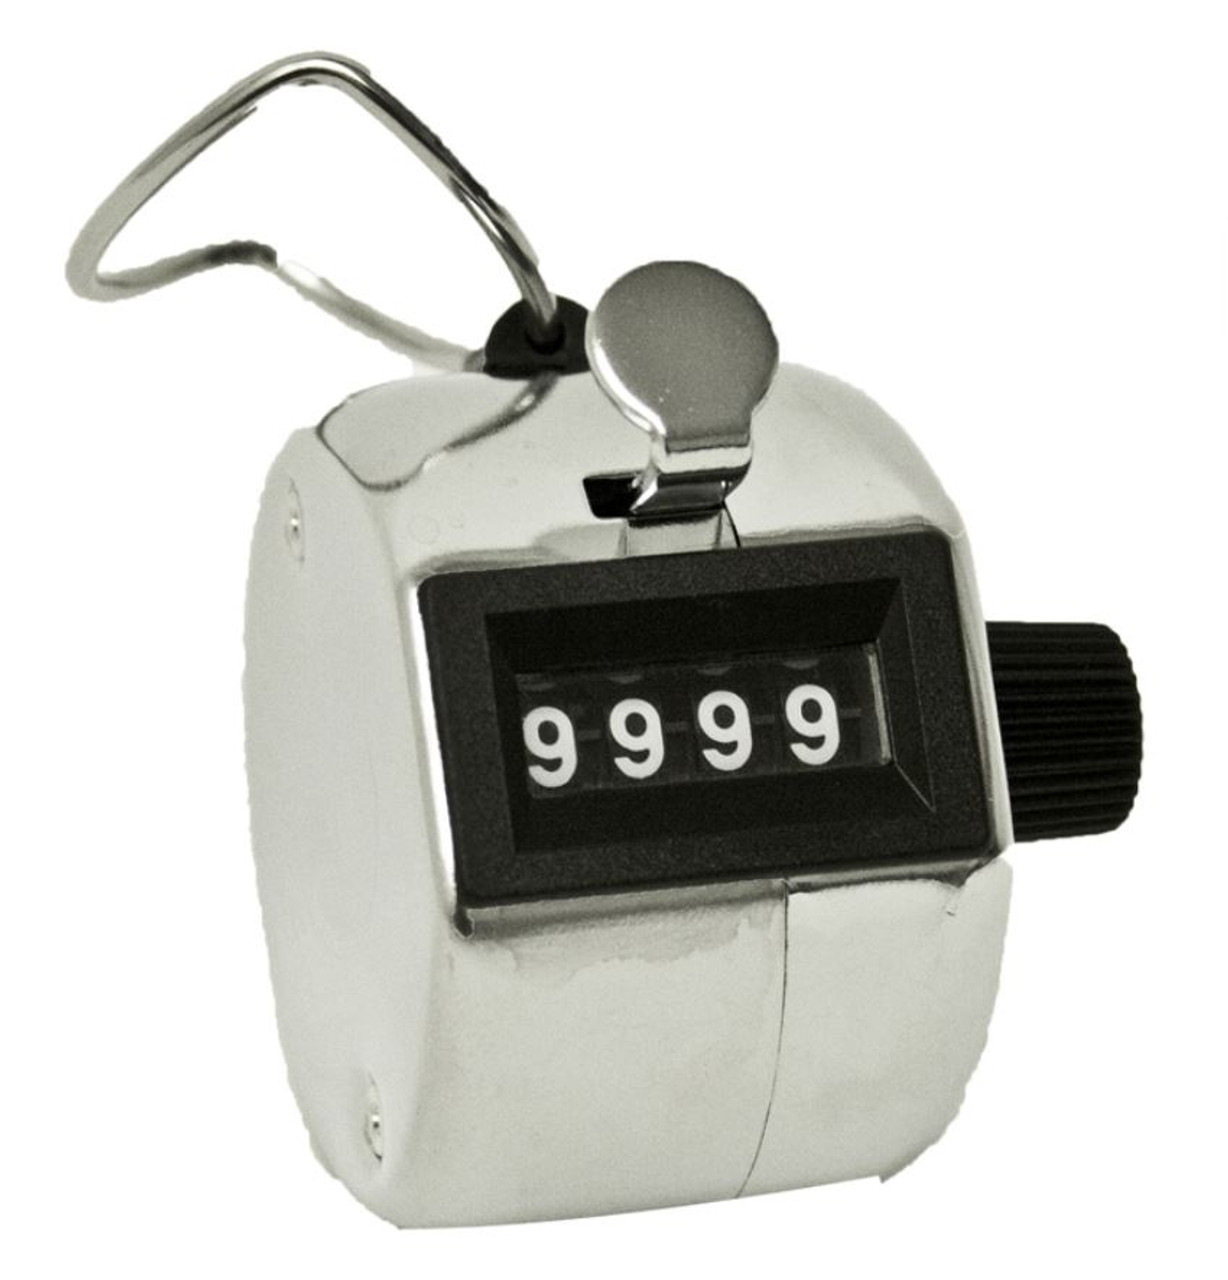 Bisley Tally Counter for counting birds and head counts